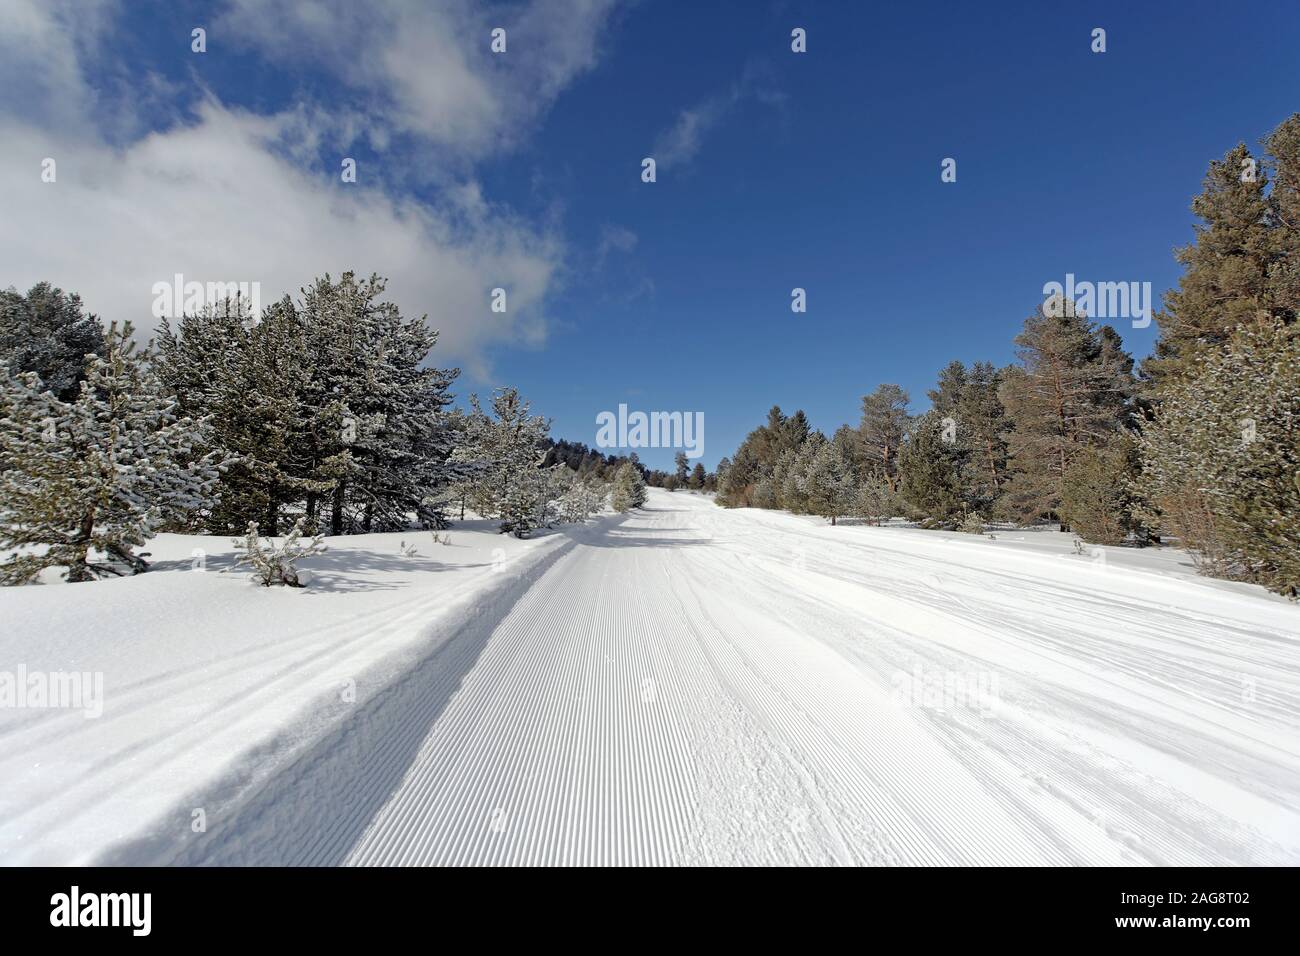 Green level ski piste with smooth snow after groomed by a ski truck in Sarikamis Turkey. Pine trees covered with snow around the road. Stock Photo